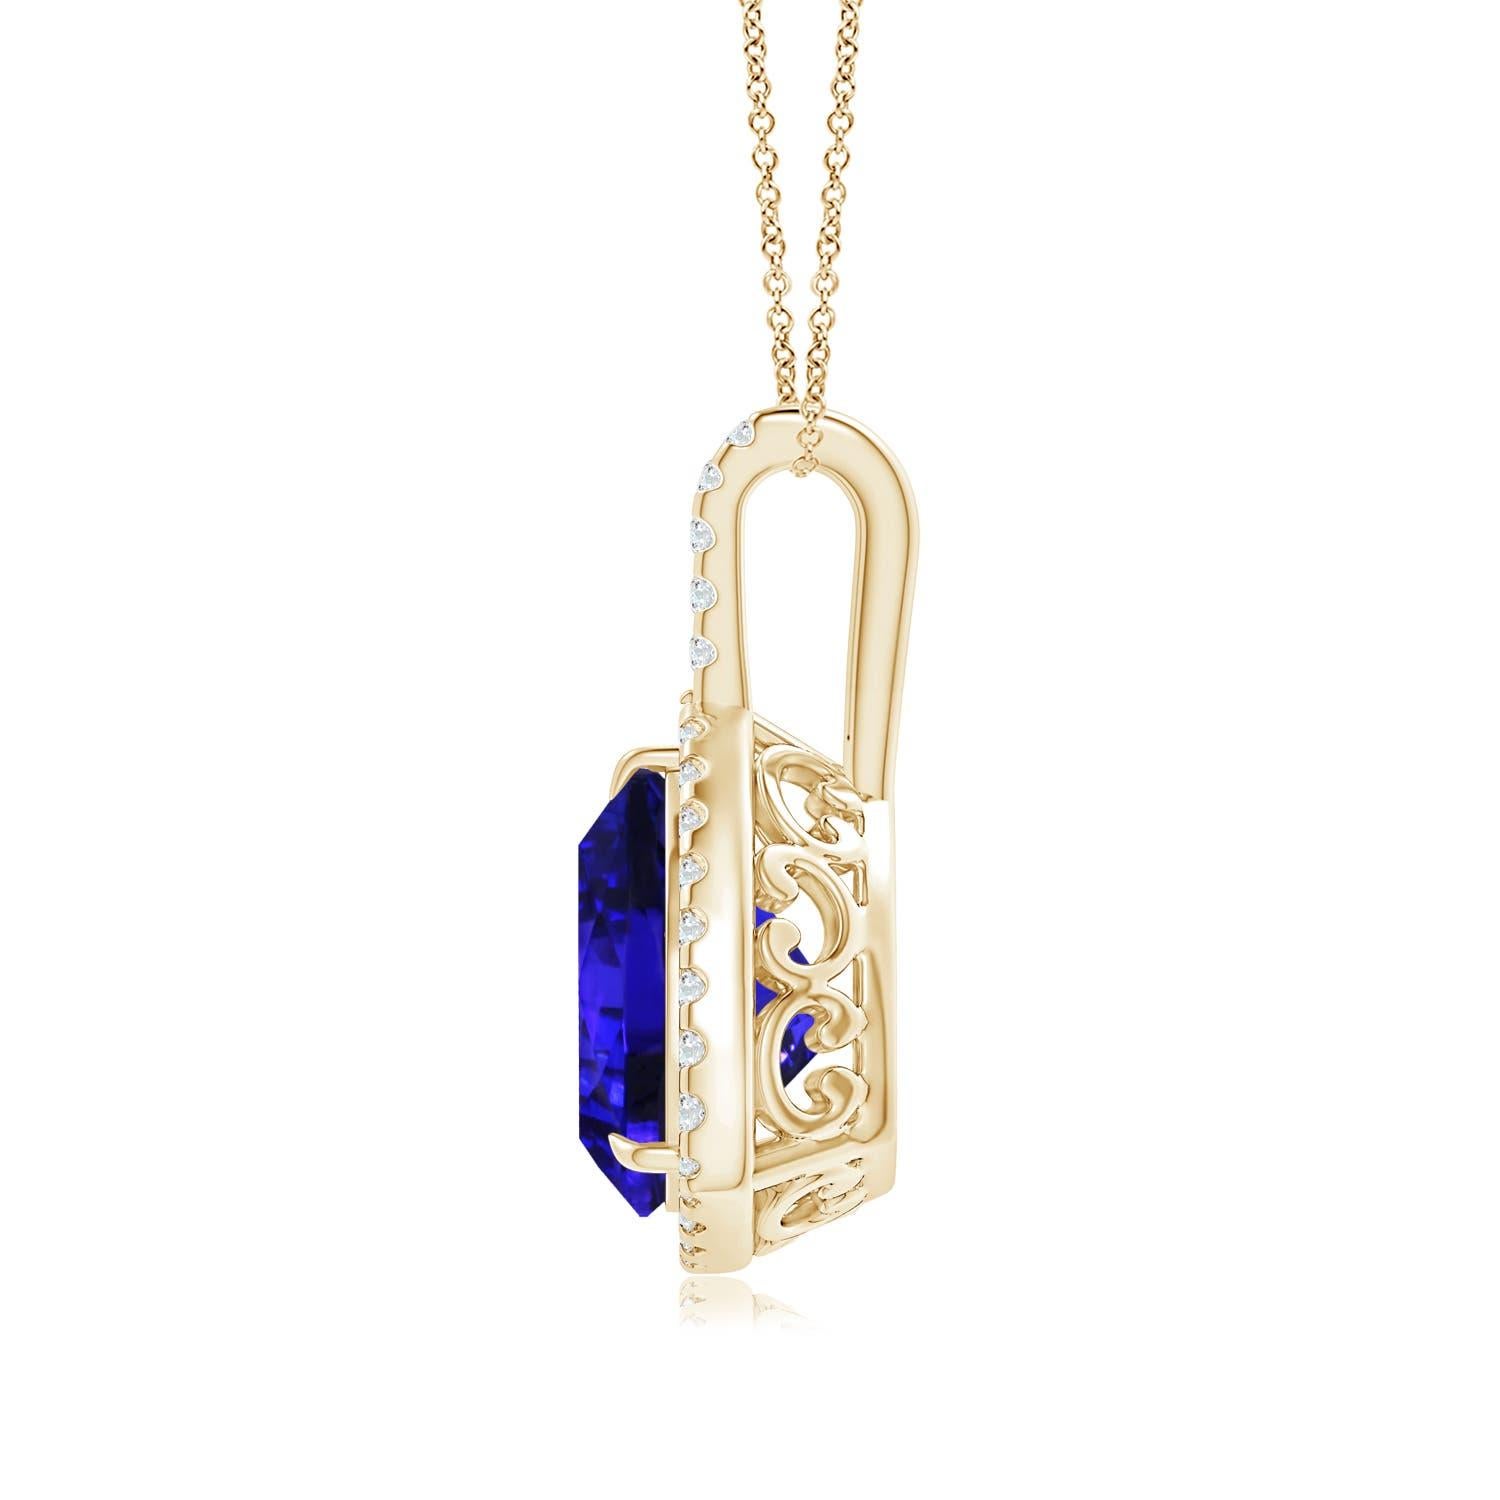 Designed with a diamond-studded bale and elegant scrollwork on the metal, this trillion tanzanite halo pendant in 14k yellow gold looks simple yet enigmatic. The brilliant u prong diamonds enhance the bluish-purple hue of the GIA certified